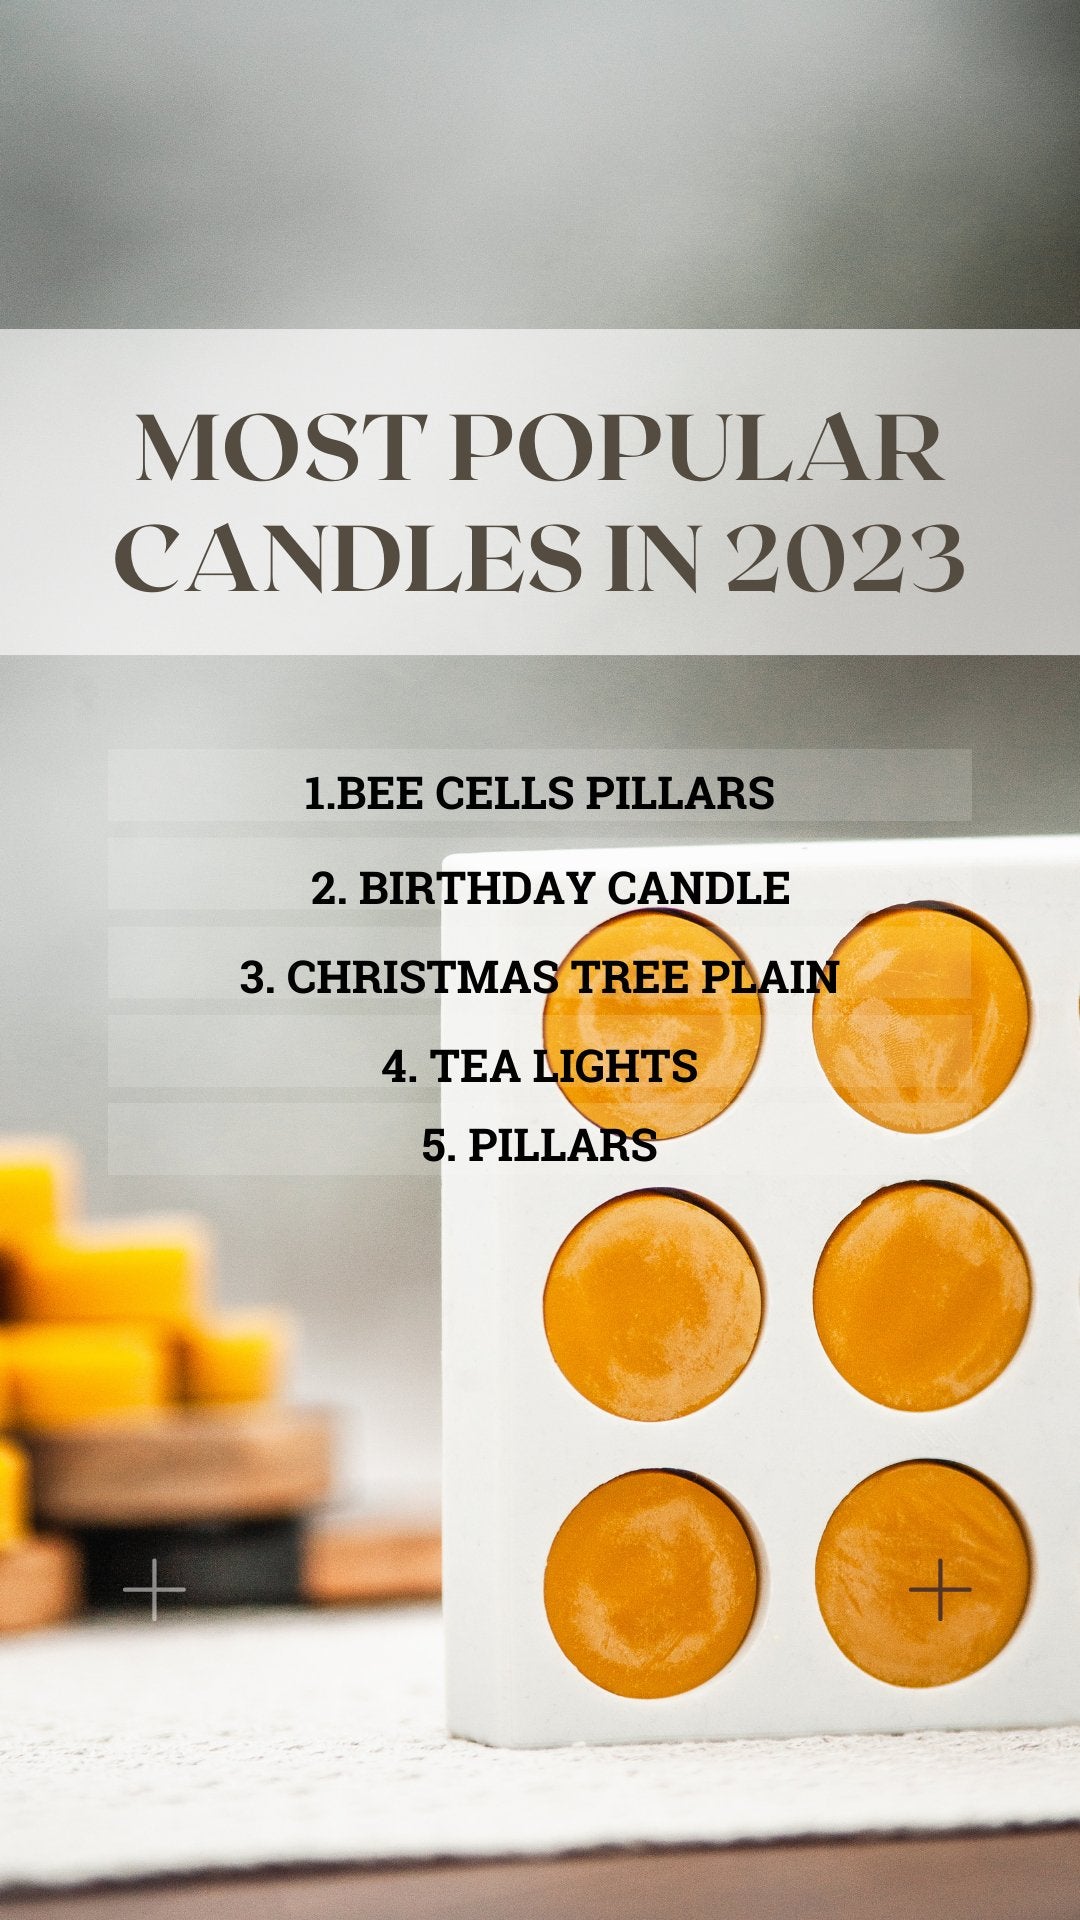 Our TOP 5 bestsellers in 2023 - Latvian Candles